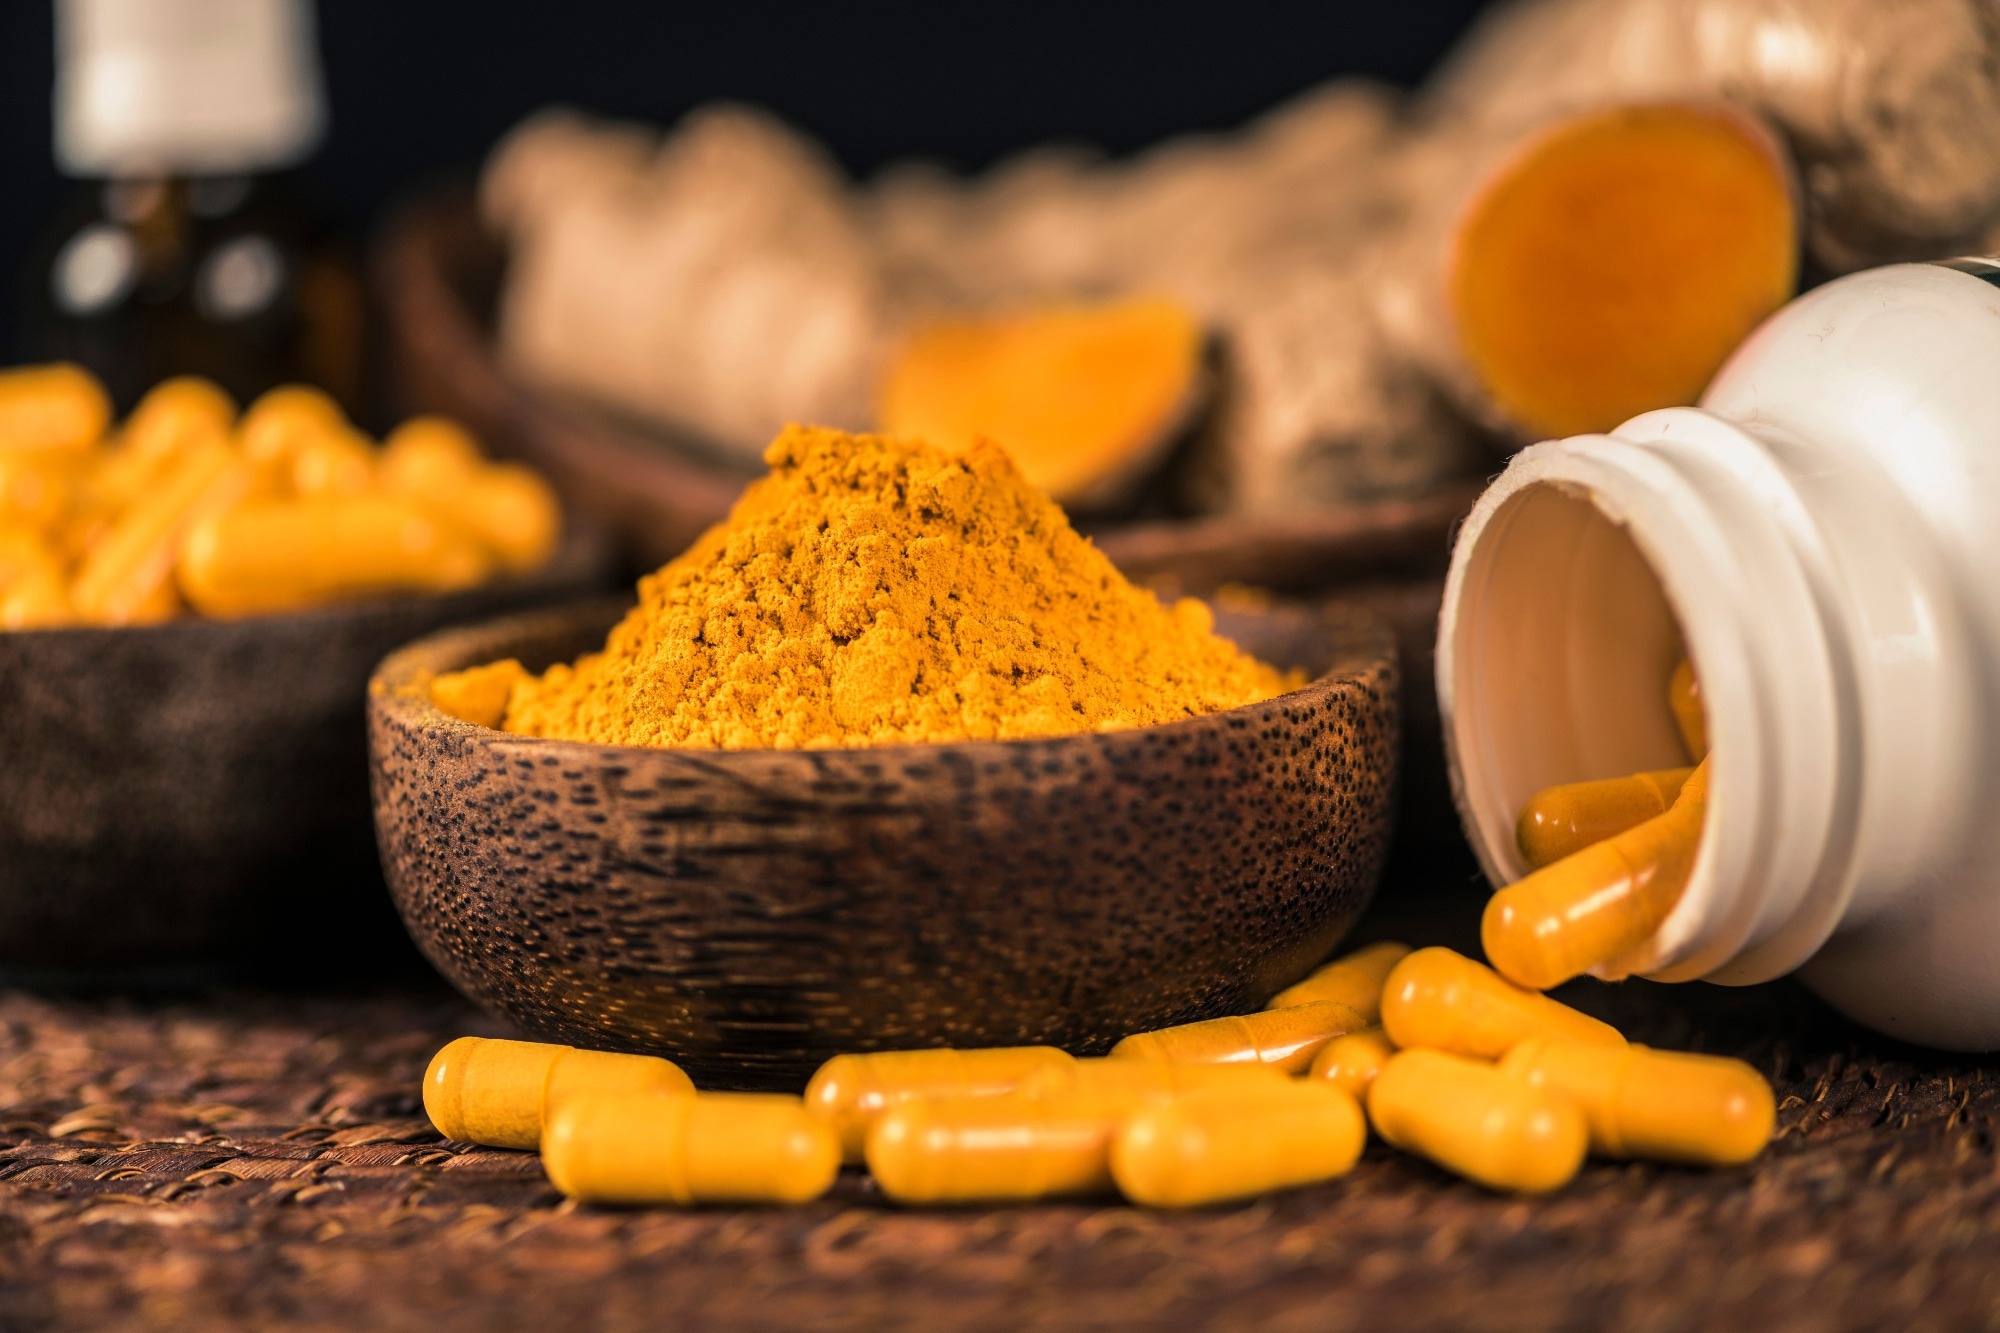 Study: Curcumin Confers Anti-Inflammatory Effects in Adults Who Recovered from COVID-19 and Were Subsequently Vaccinated: A Randomized Controlled Trial. Image Credit: Microgen / Shutterstock